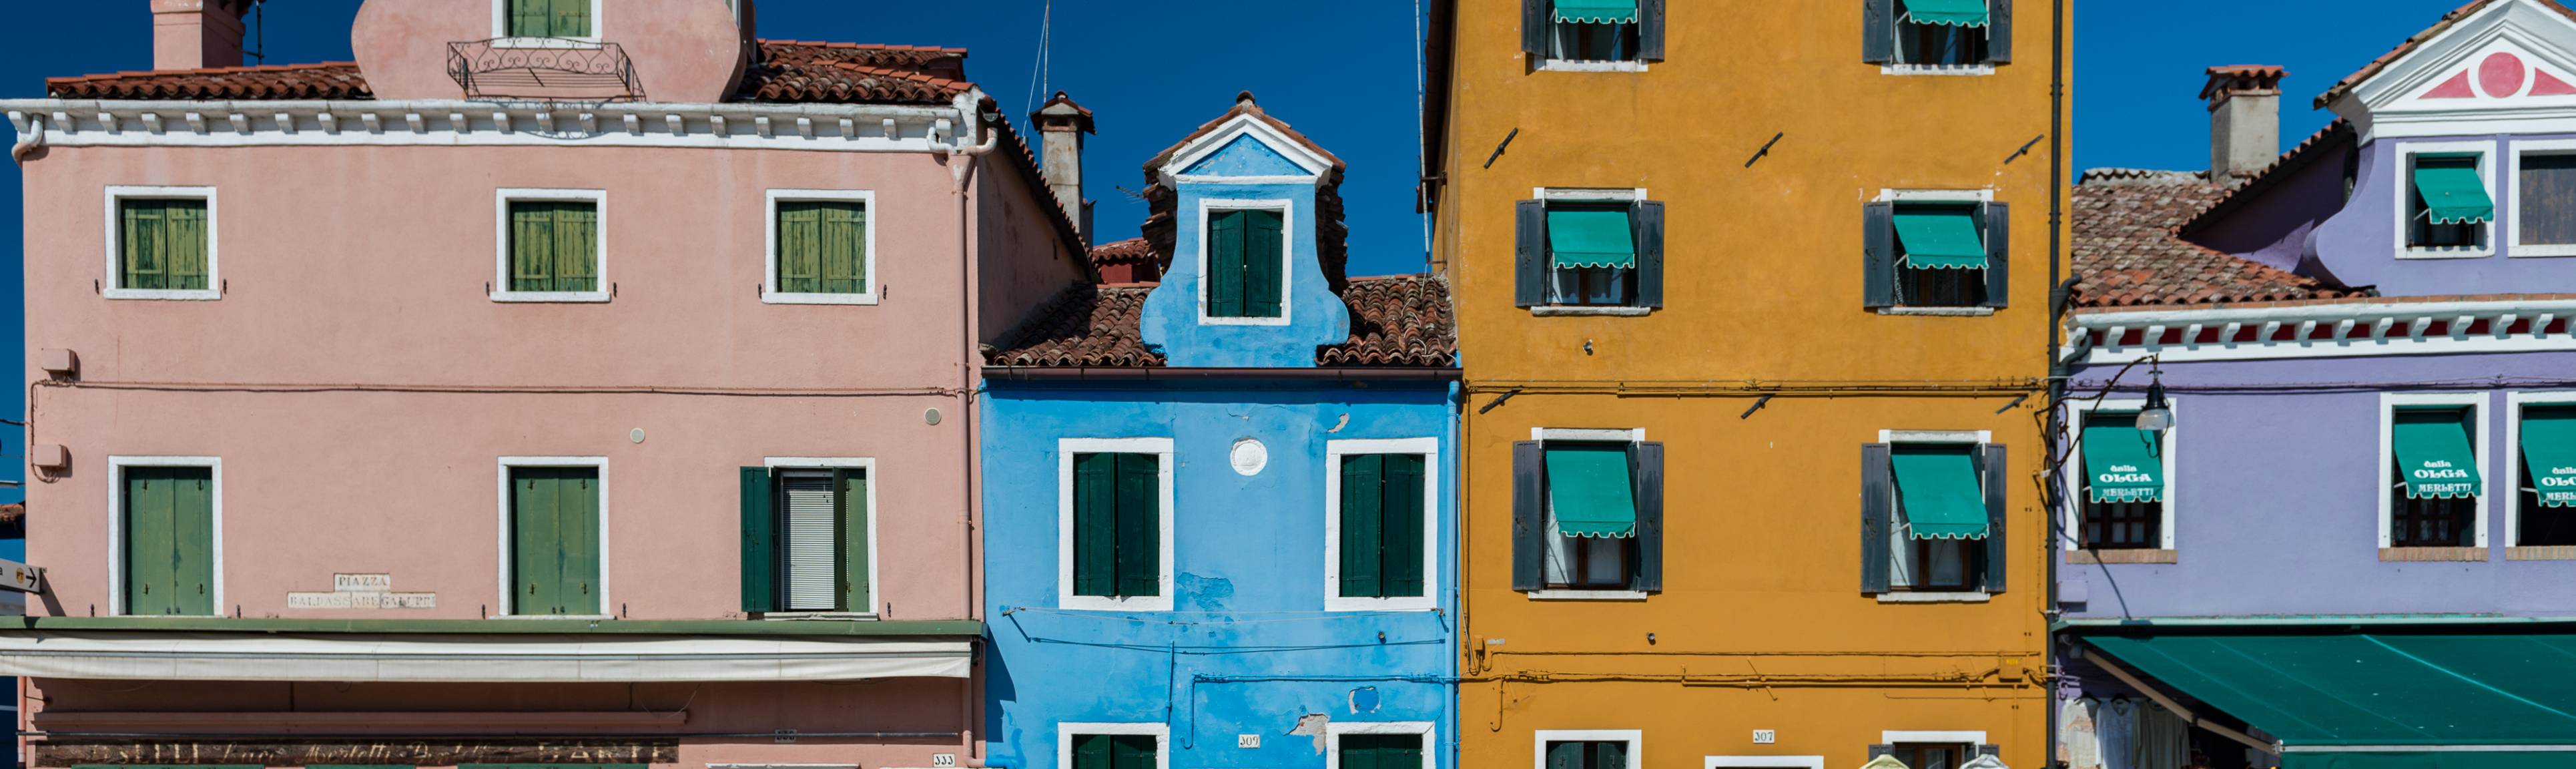 Colorful buildings in a row on the island of Burano near Venice